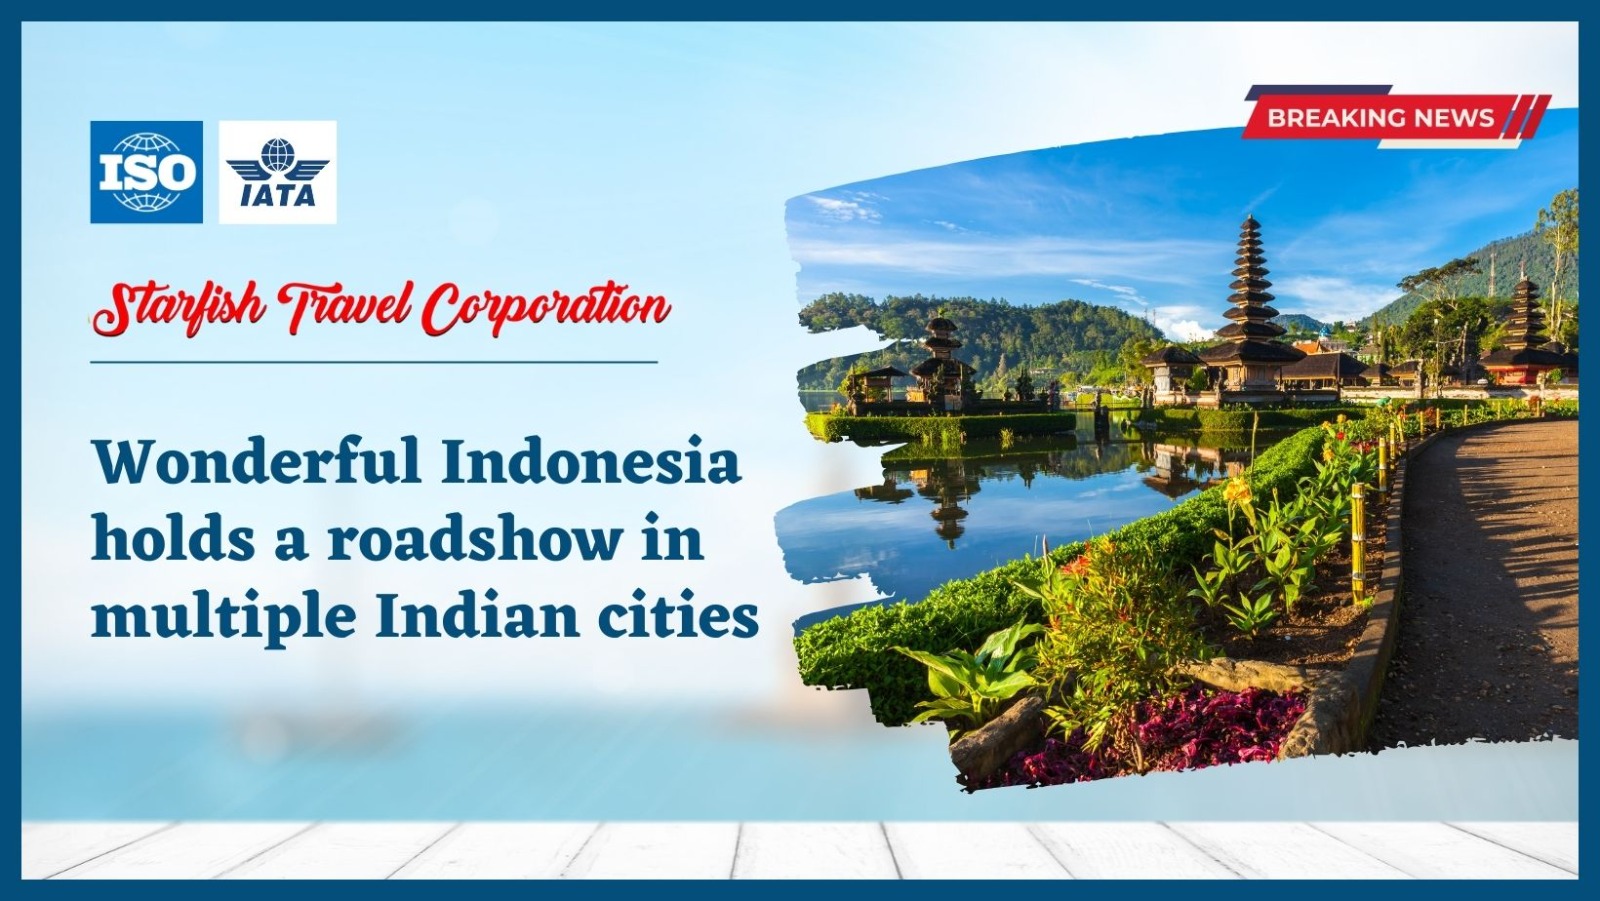 Wonderful Indonesia holds a roadshow in multiple Indian cities